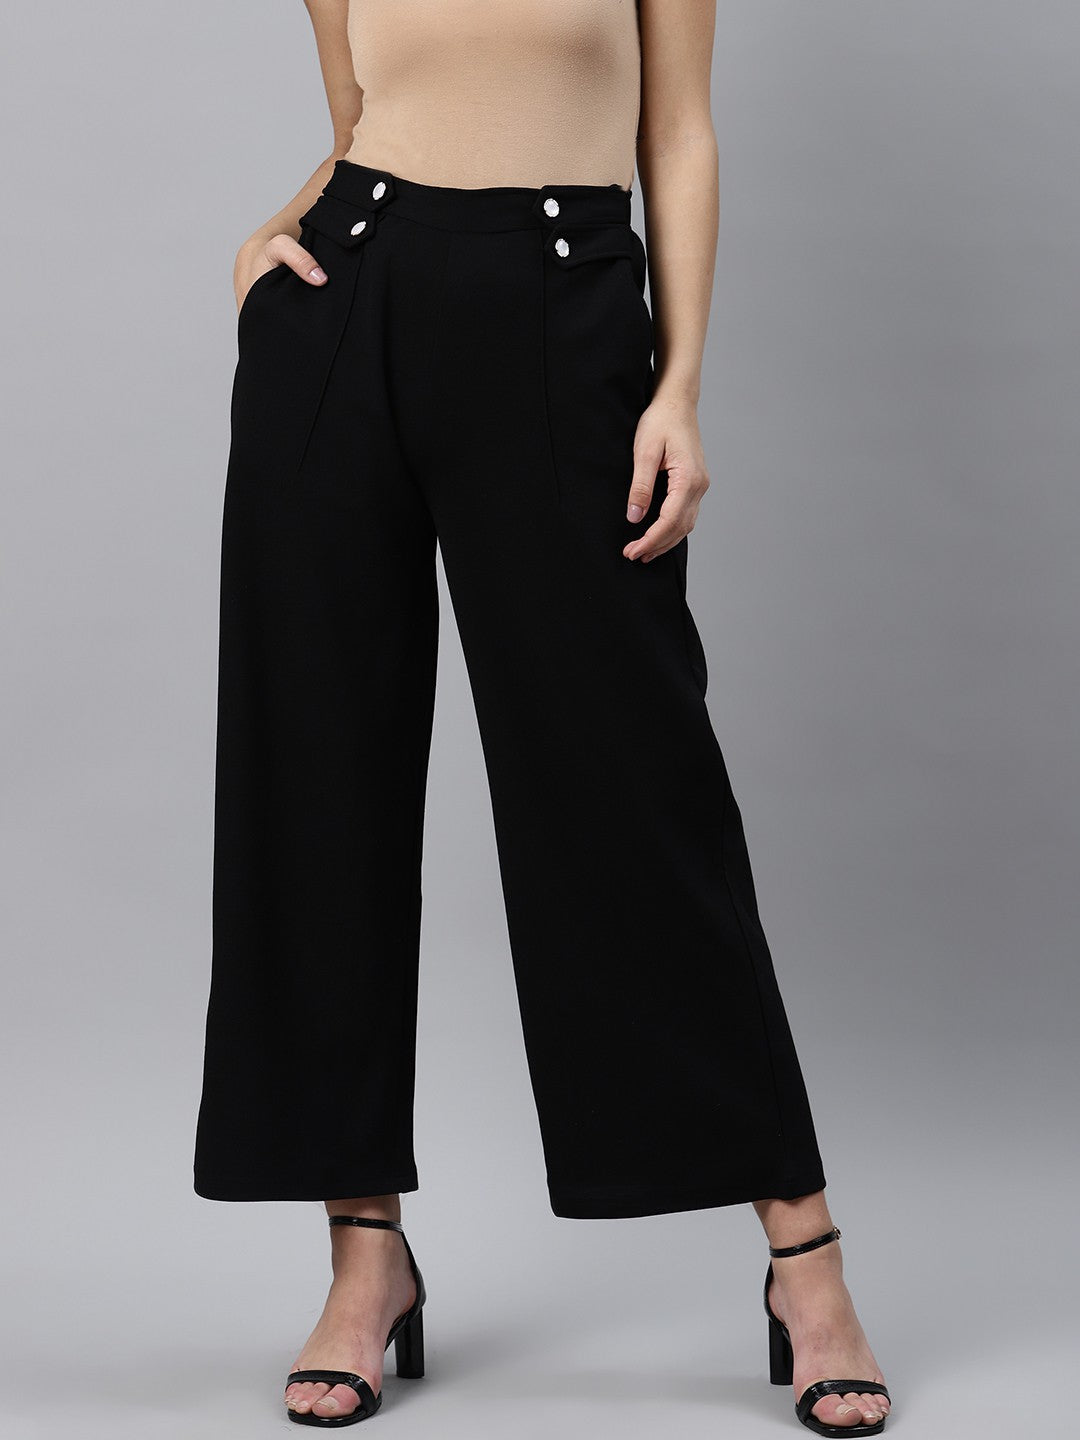 Formal Trouser: Browse MenBlackCotton RayonFormal Trouser on Cliths